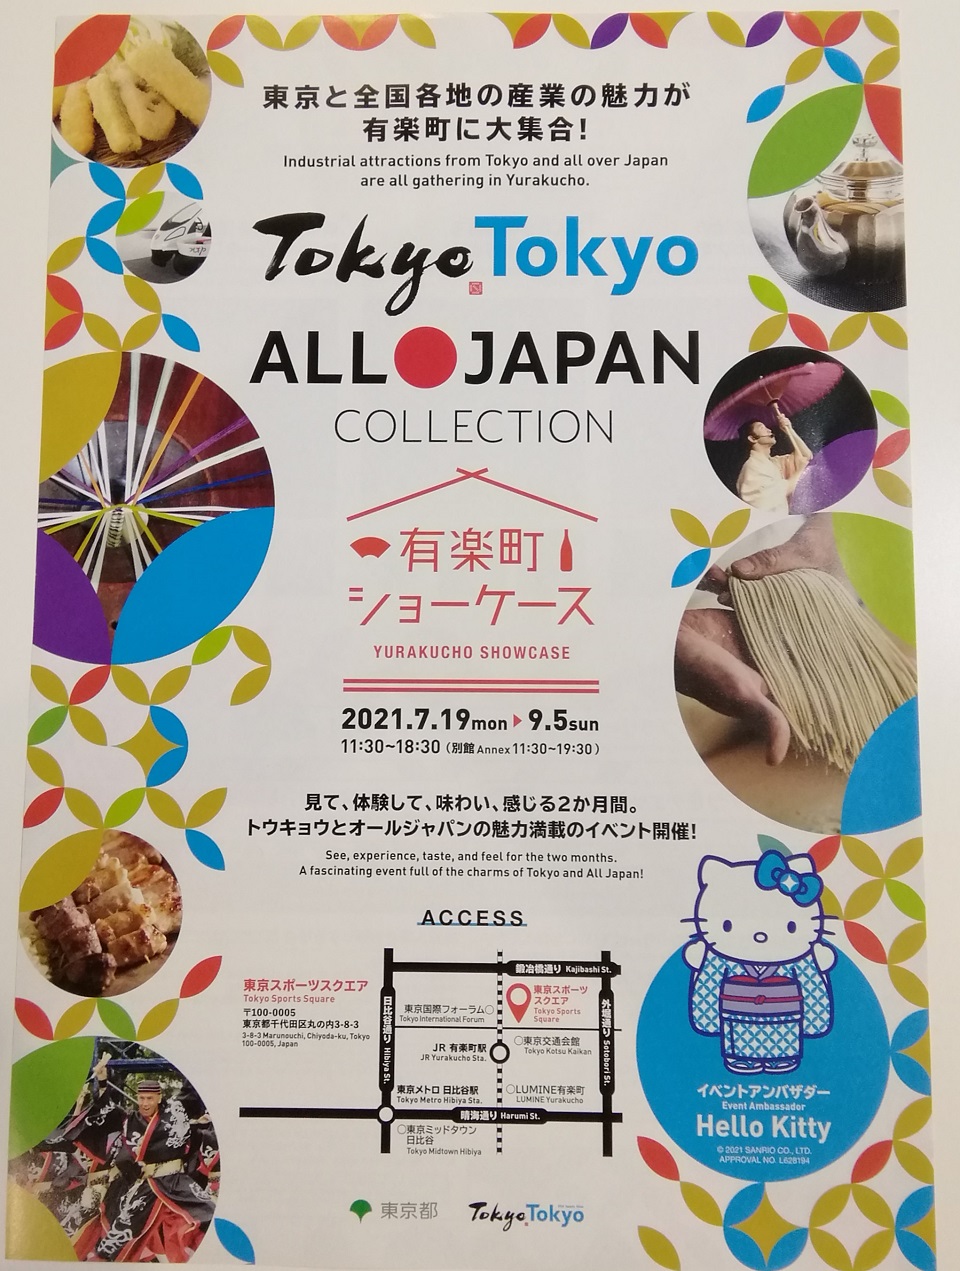 「Tokyo TOKYO ALL JAPAN COLLECTION　～有楽町ショーケース～」とは・・・ Tokyo TOKYO ALL JAPAN COLLECTION
　～有楽町ショーケース～　で見つけました！
　　竺仙さんのブース
　　～　竺仙　～